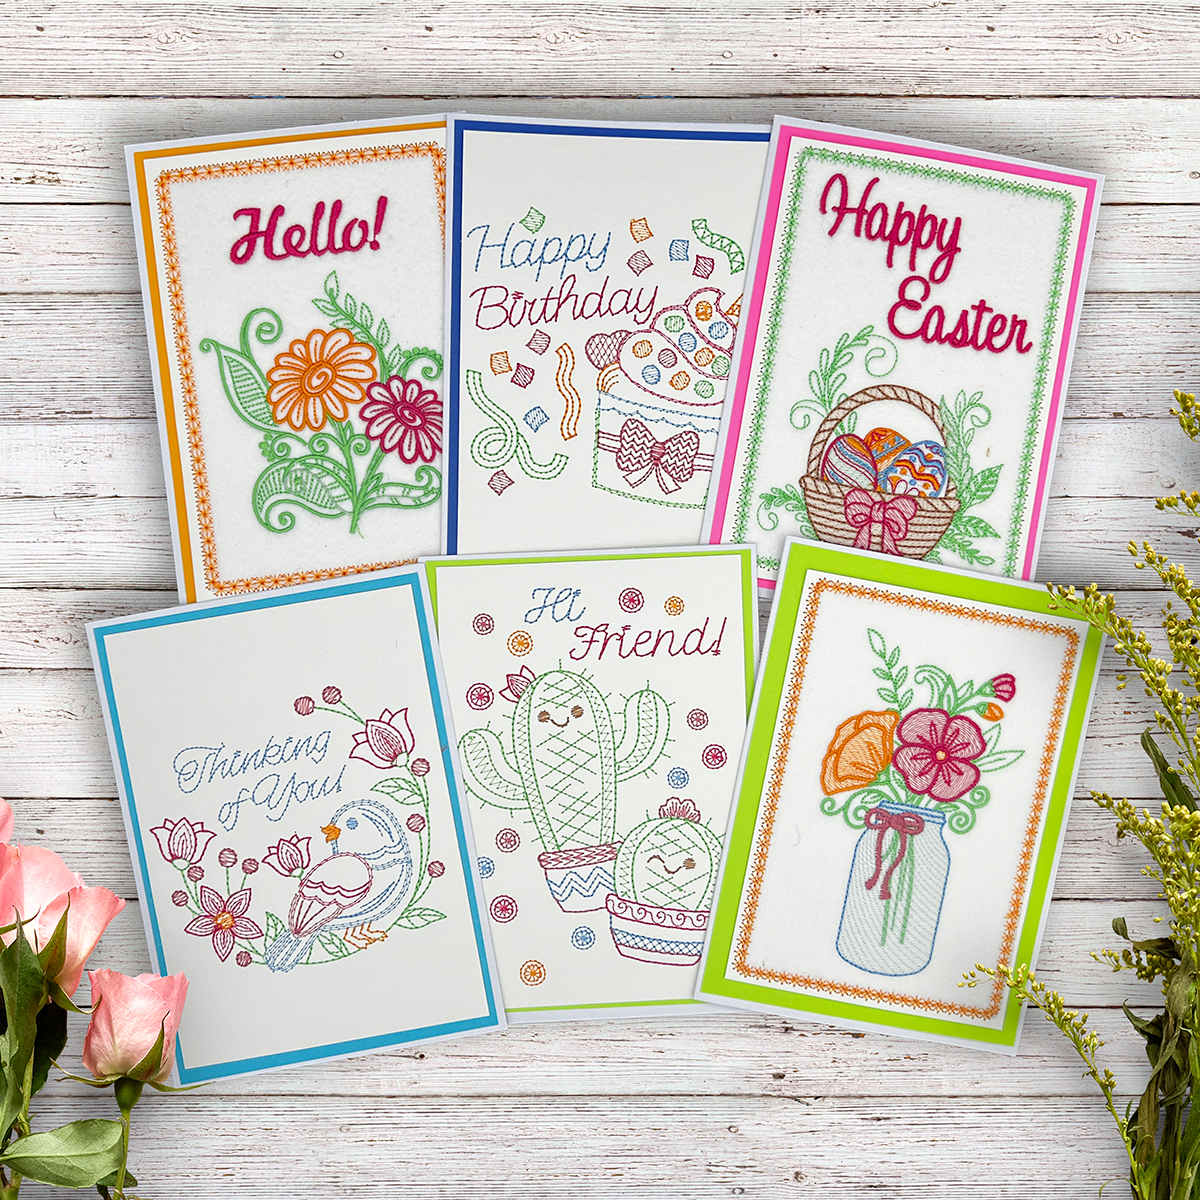 “Greeting Card Kit” be available before the Class is removed from website?  $13.00 coupon off Sulky Kit still apply